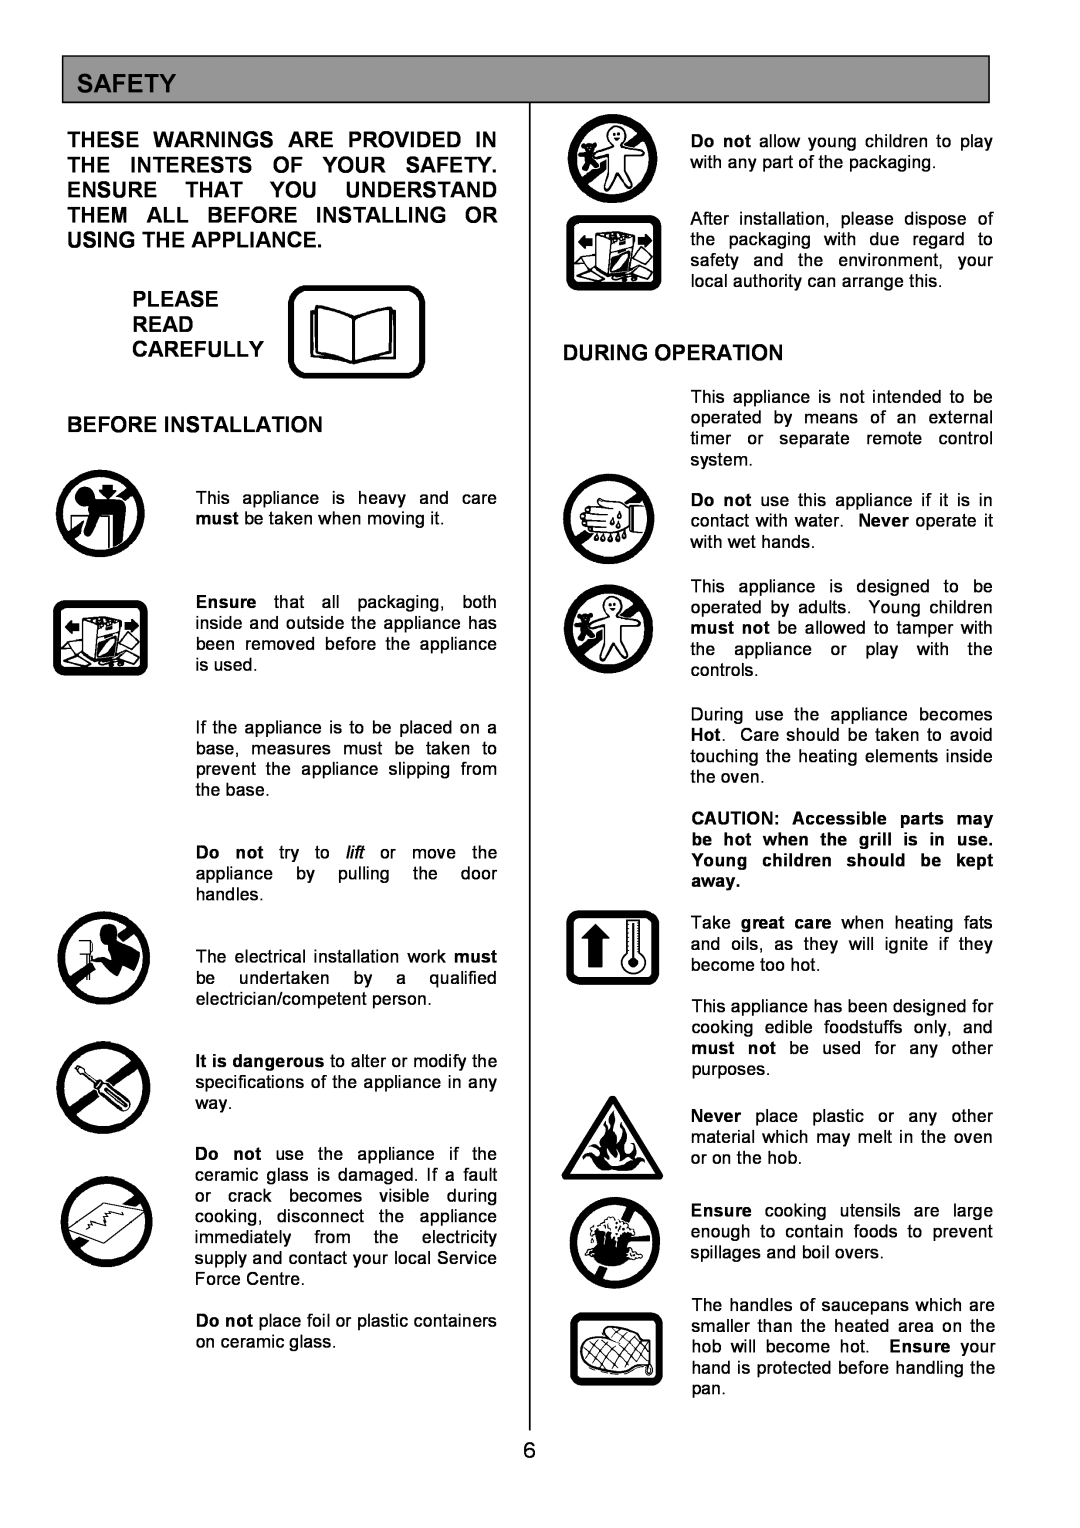 Tricity Bendix SE326 installation instructions Safety, Please Read Carefully Before Installation, During Operation 